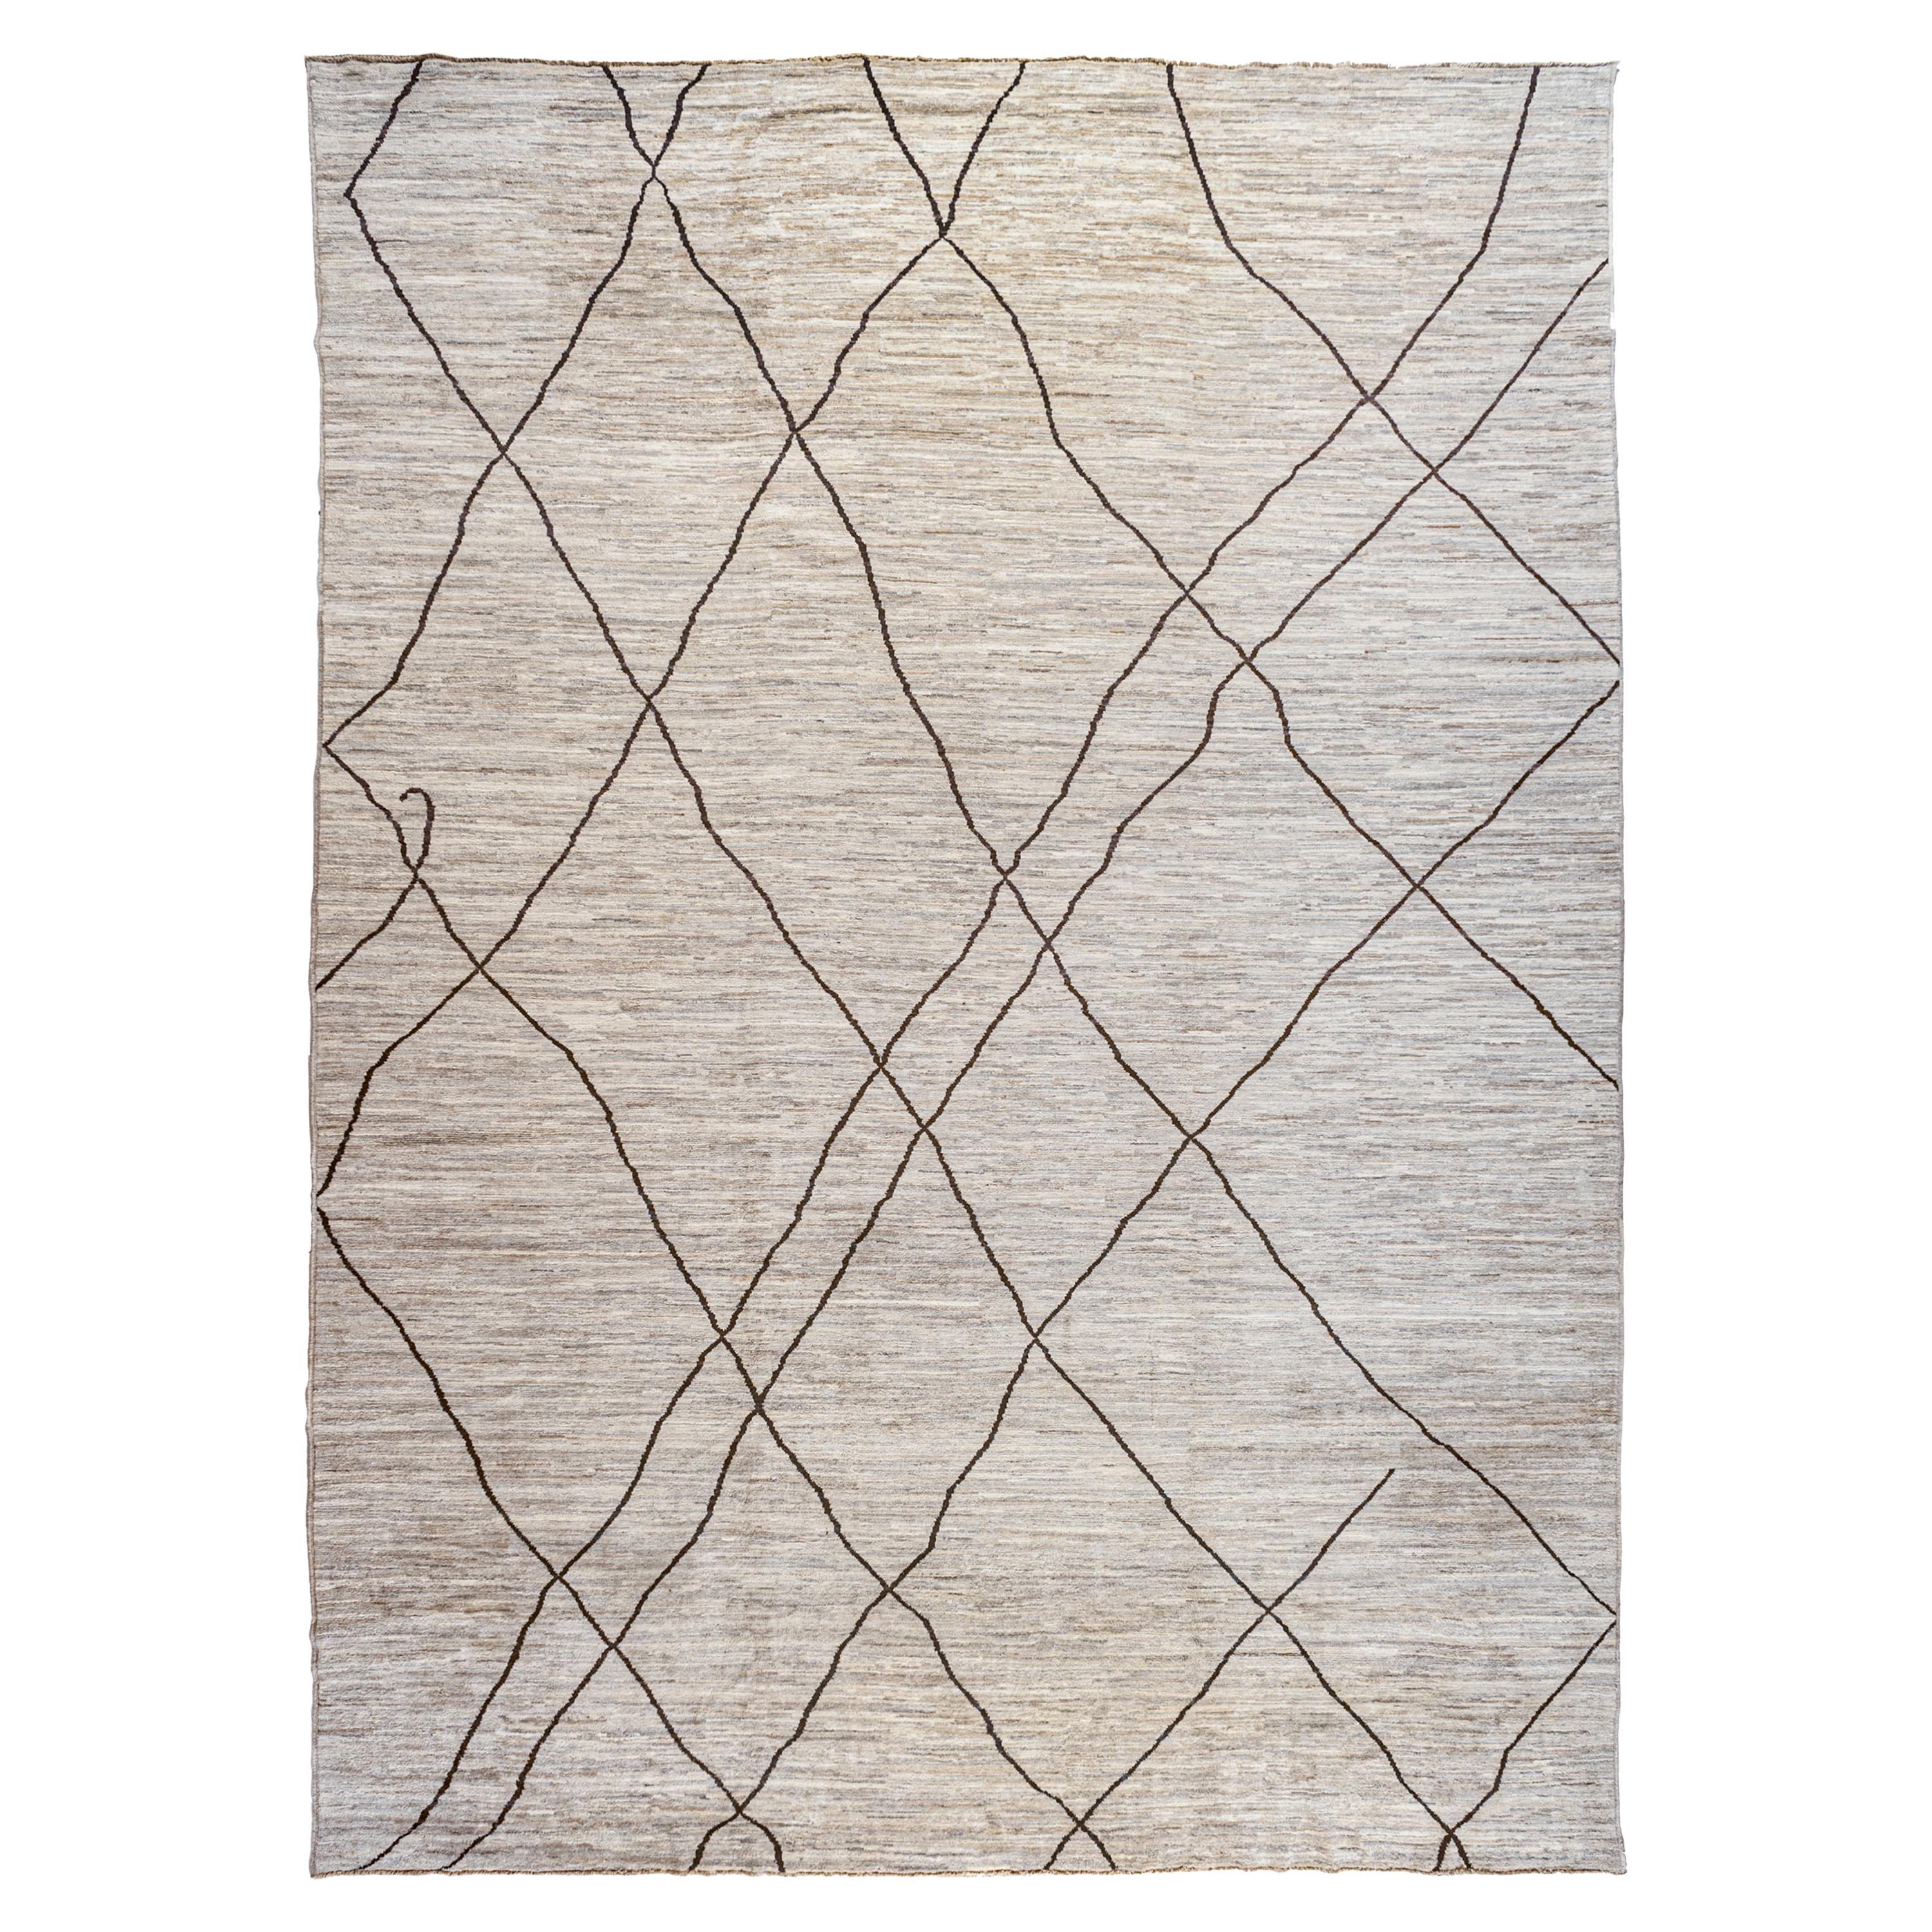 Taupe Moroccan Inspired Rug For Sale